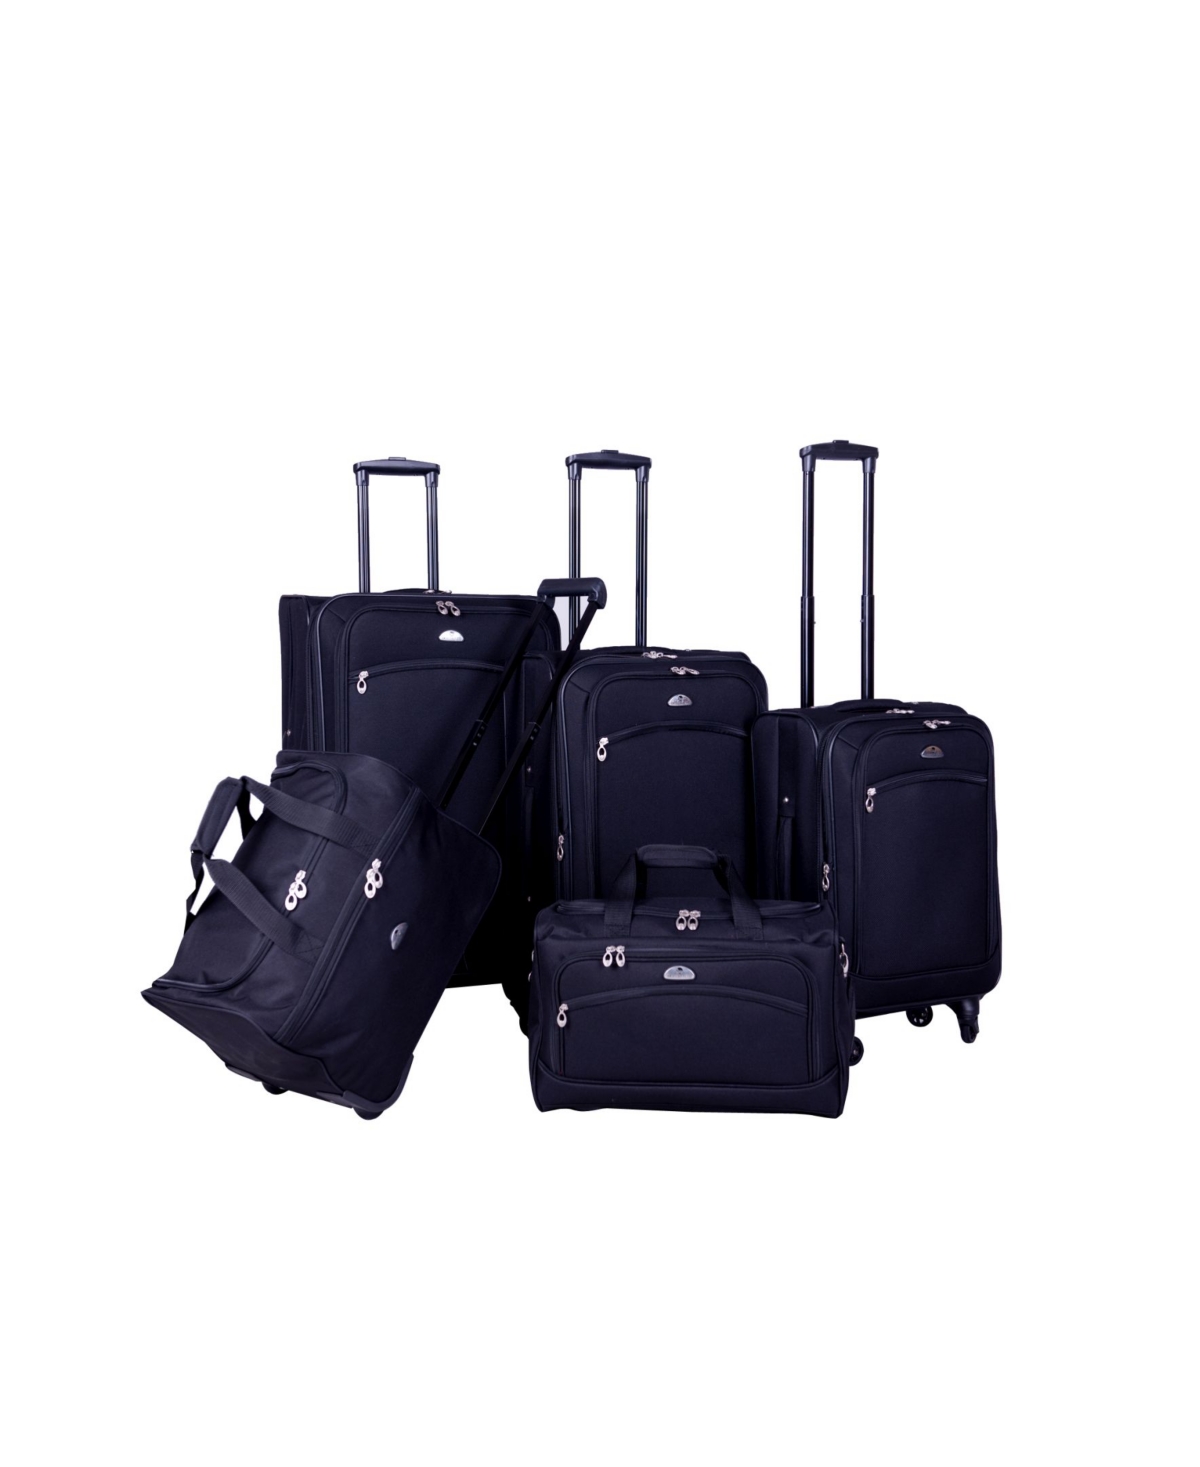 South West Collection 5 Piece Luggage Set - Black